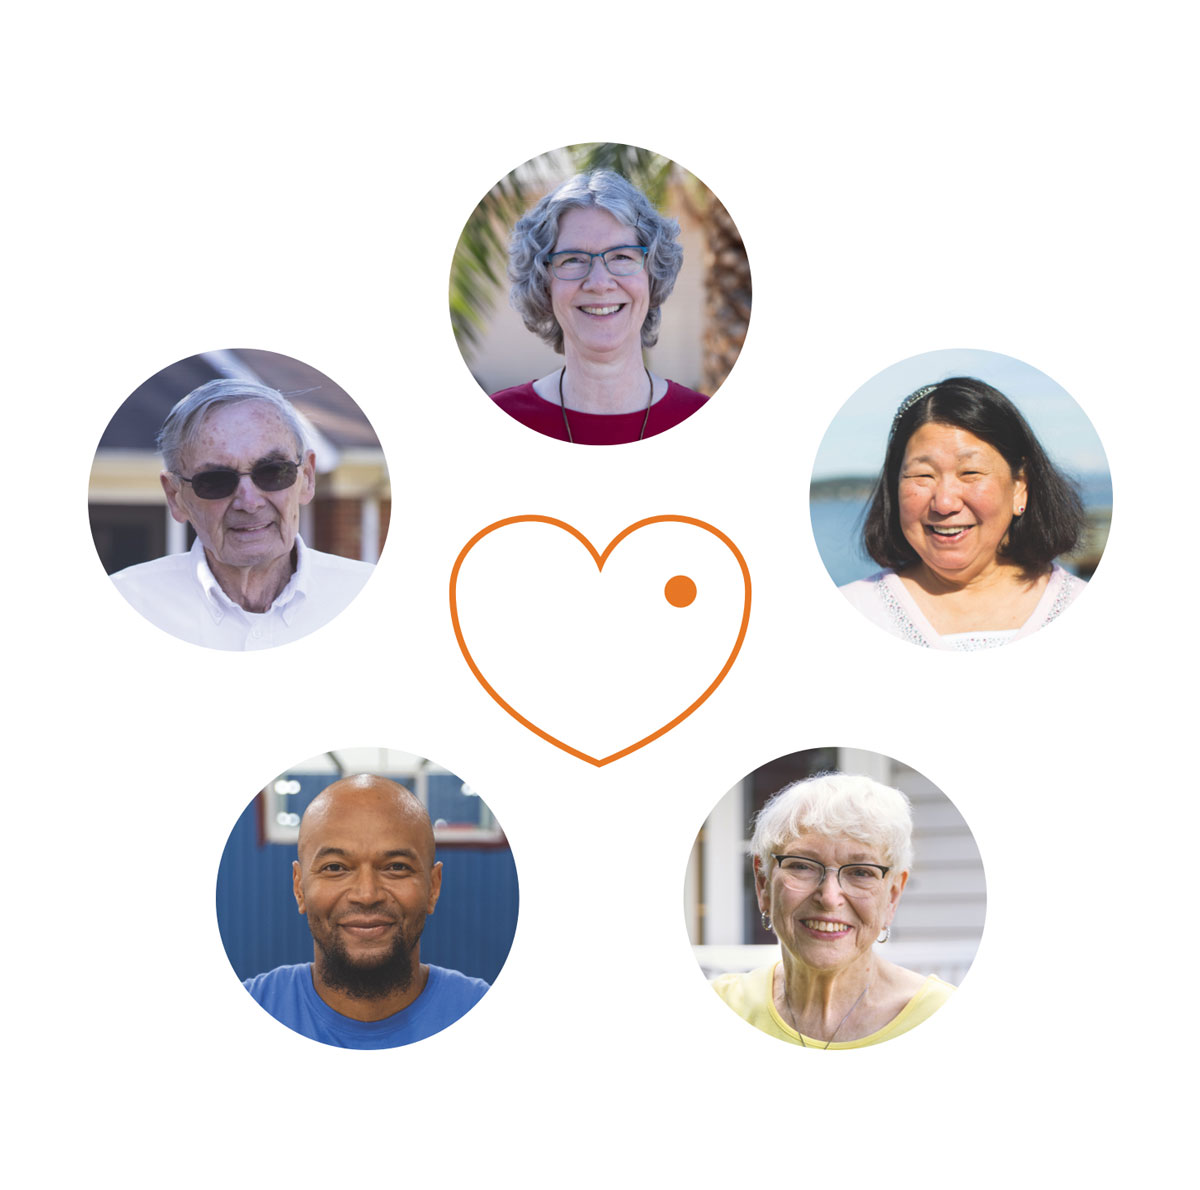 Images of WATCHMAN patients surrounding an orange heart icon.